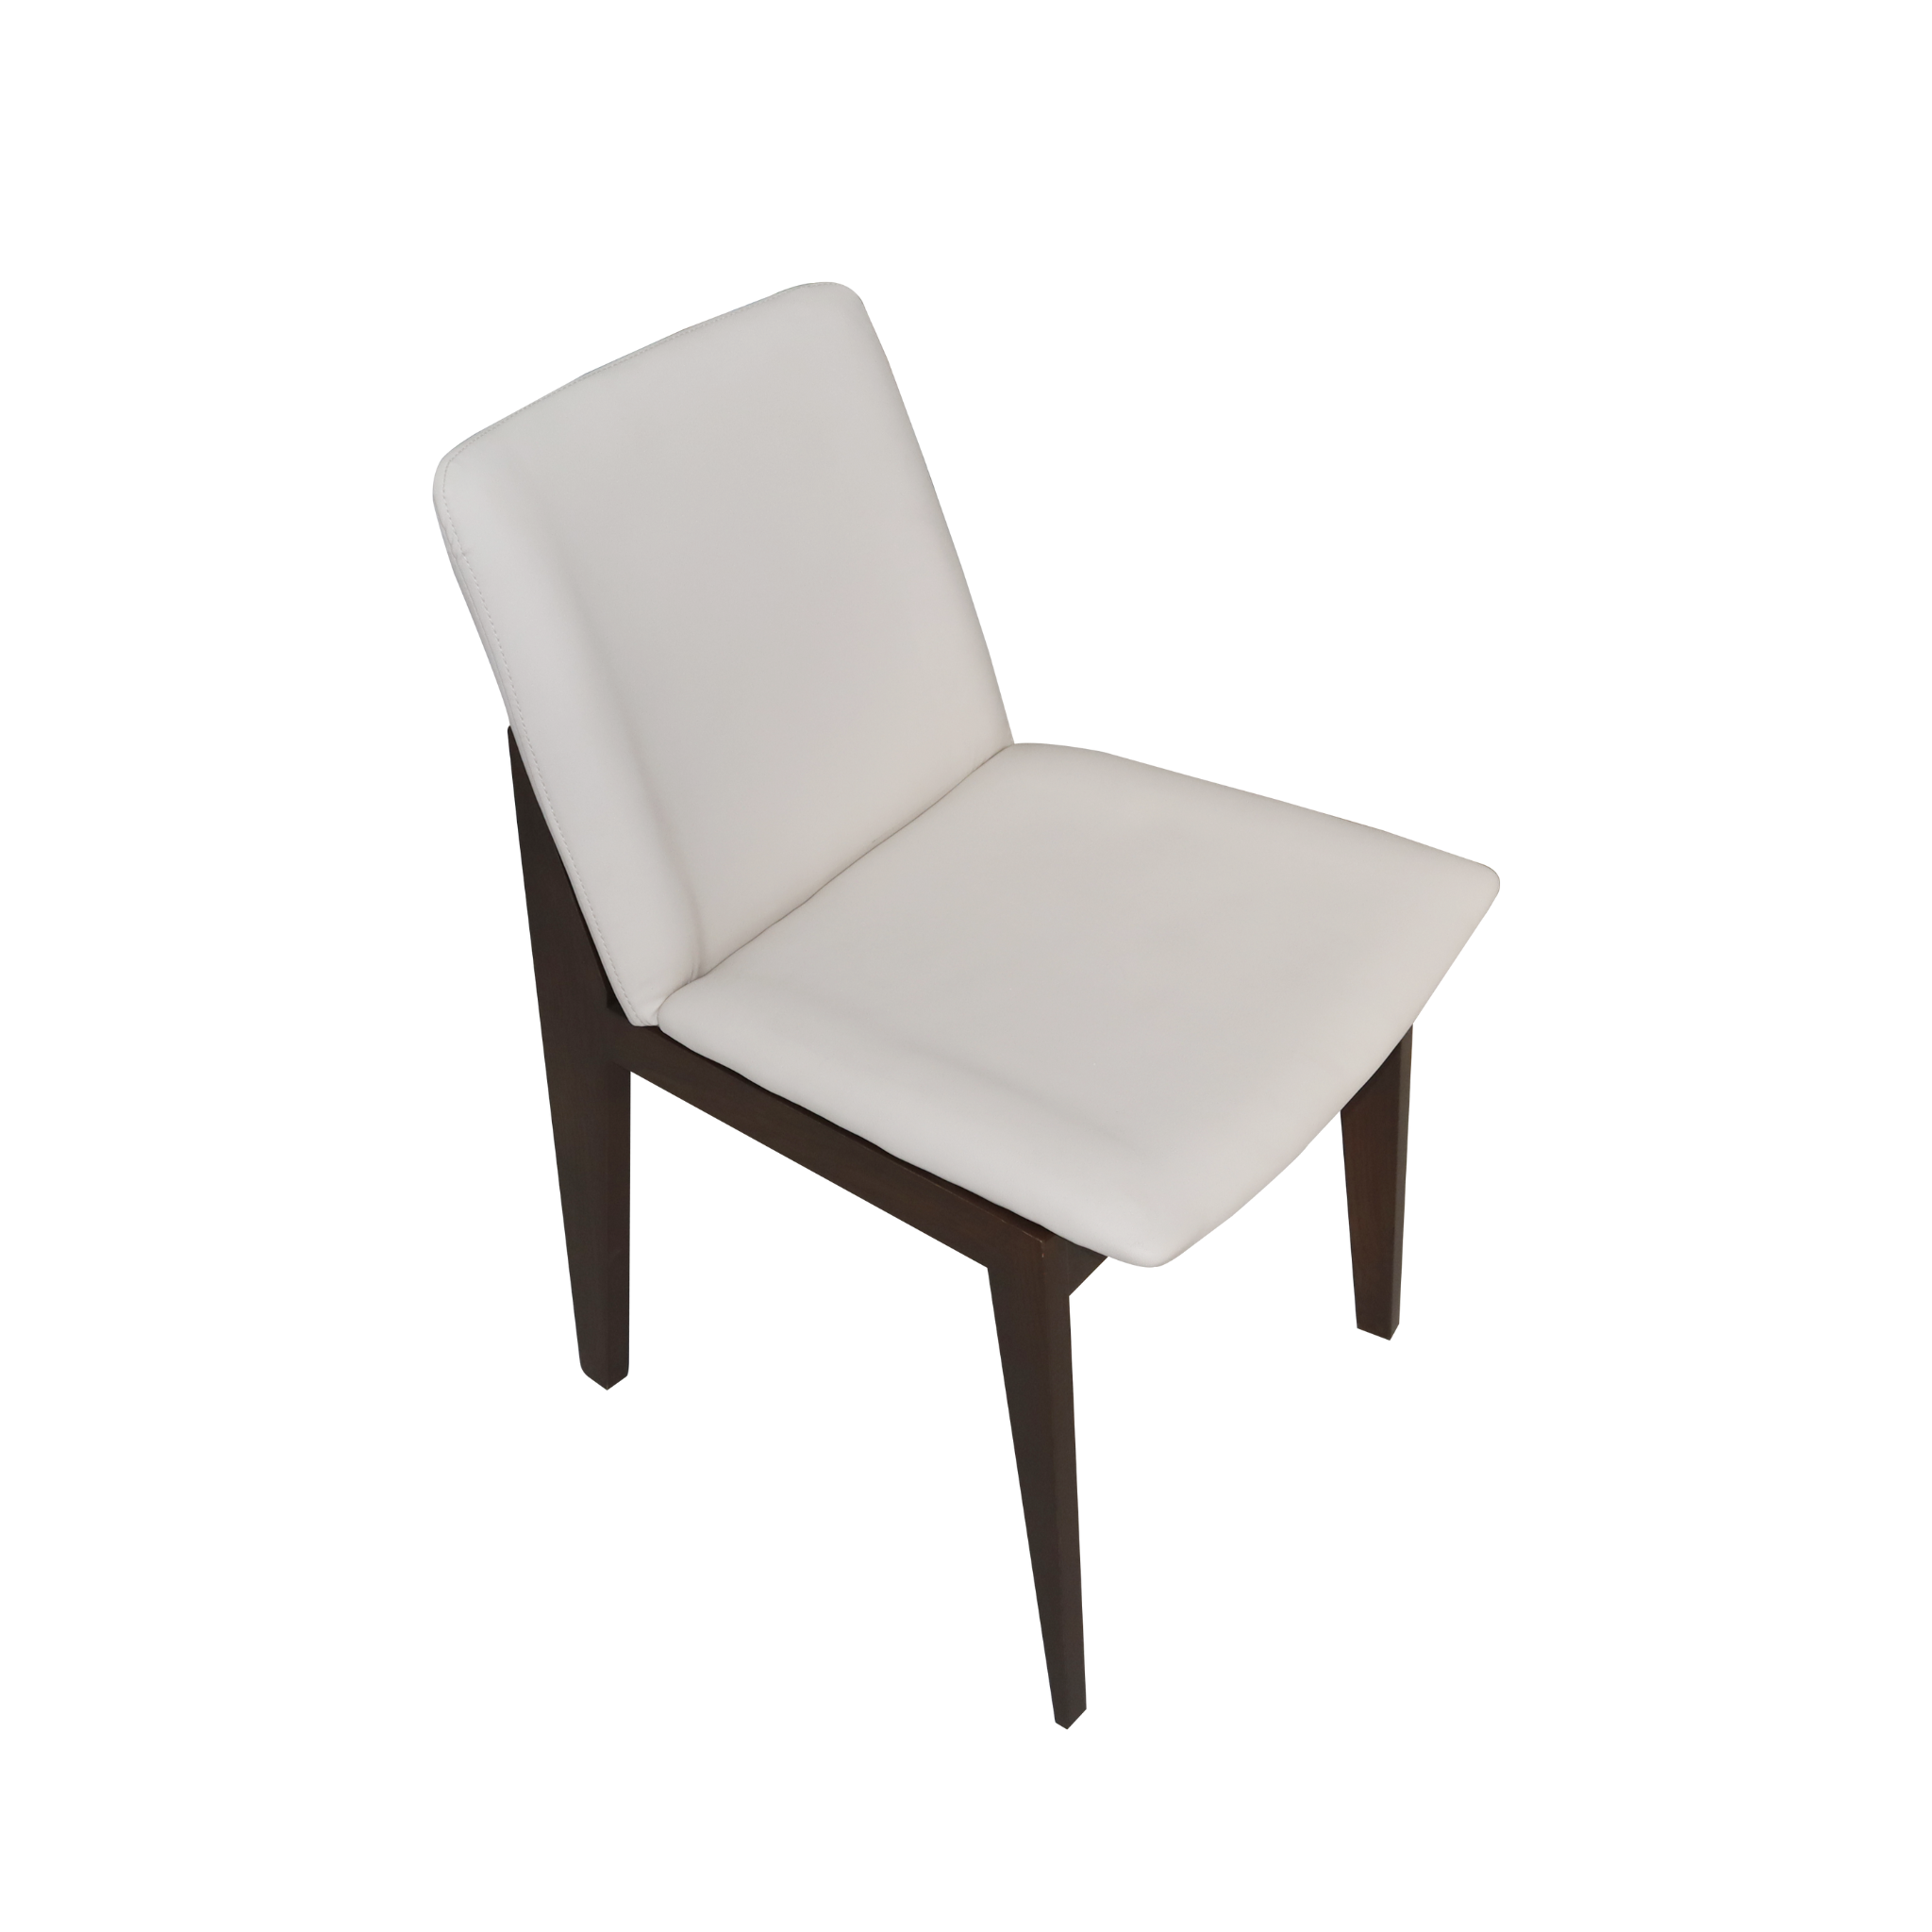 LAY Solid Wood Chair AF Home